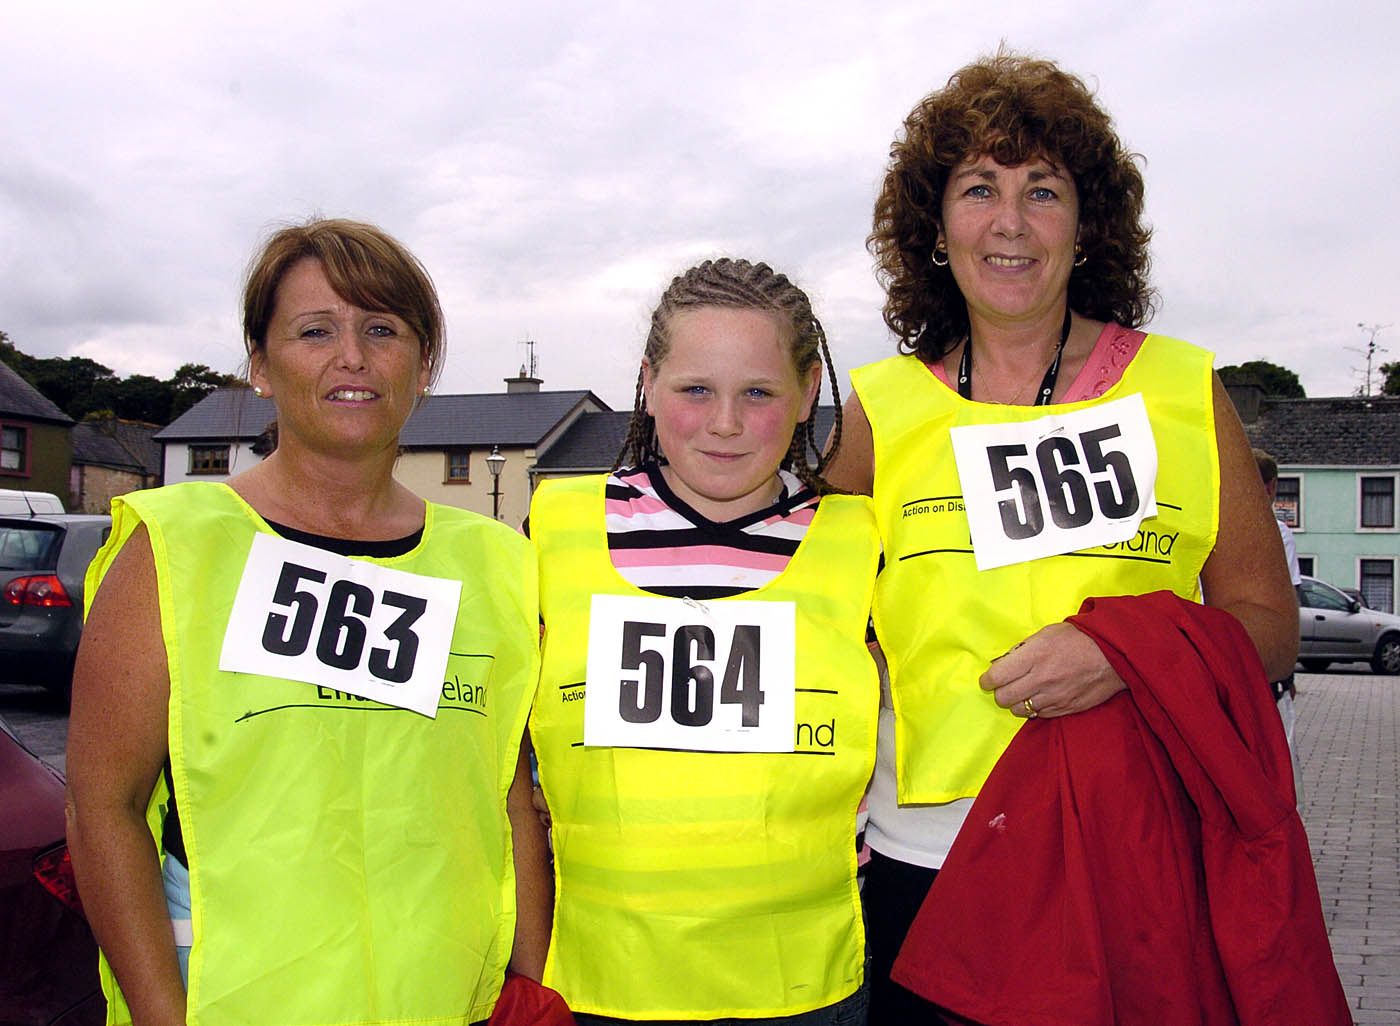 Balla 13th Annual 10K Road Race 2007,  three ladies who were running for Enable Ireland  Mary OMalley. Sarah OMalley and Ita OMalley.  Photo  Ken Wright Photography 2007. 